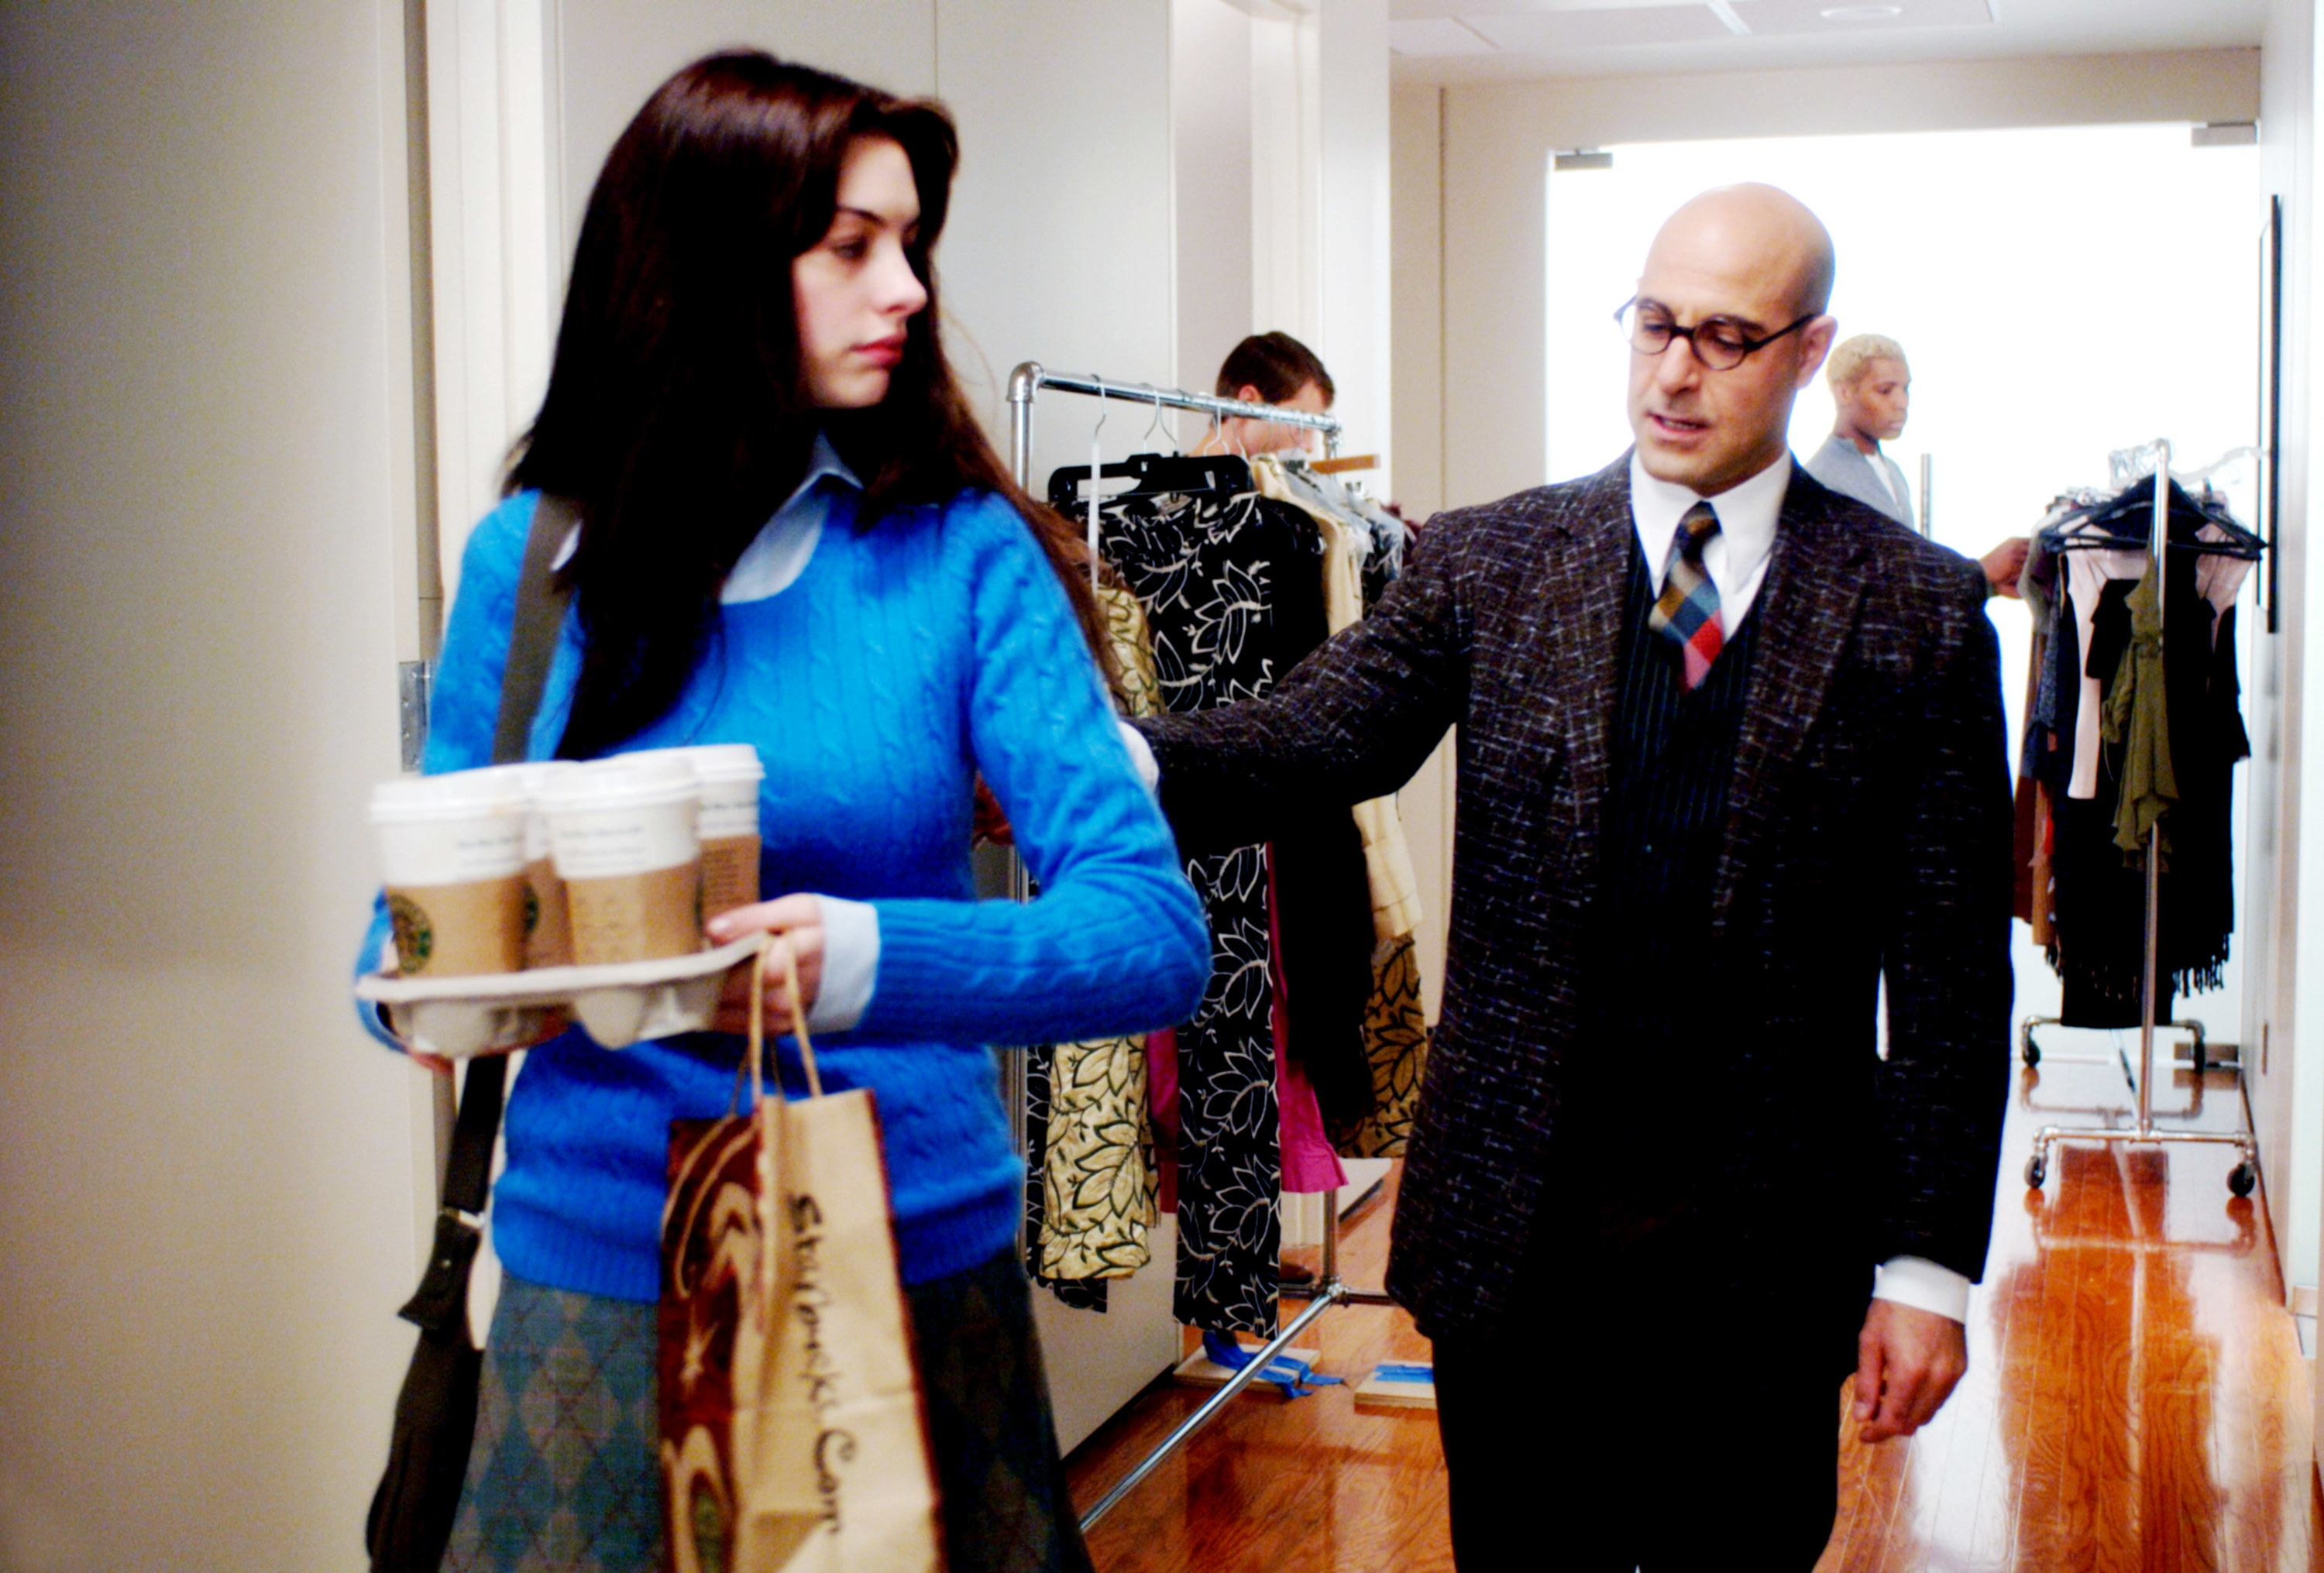 Anne Hathaway was not the first pick for 'The Devil Wears Prada